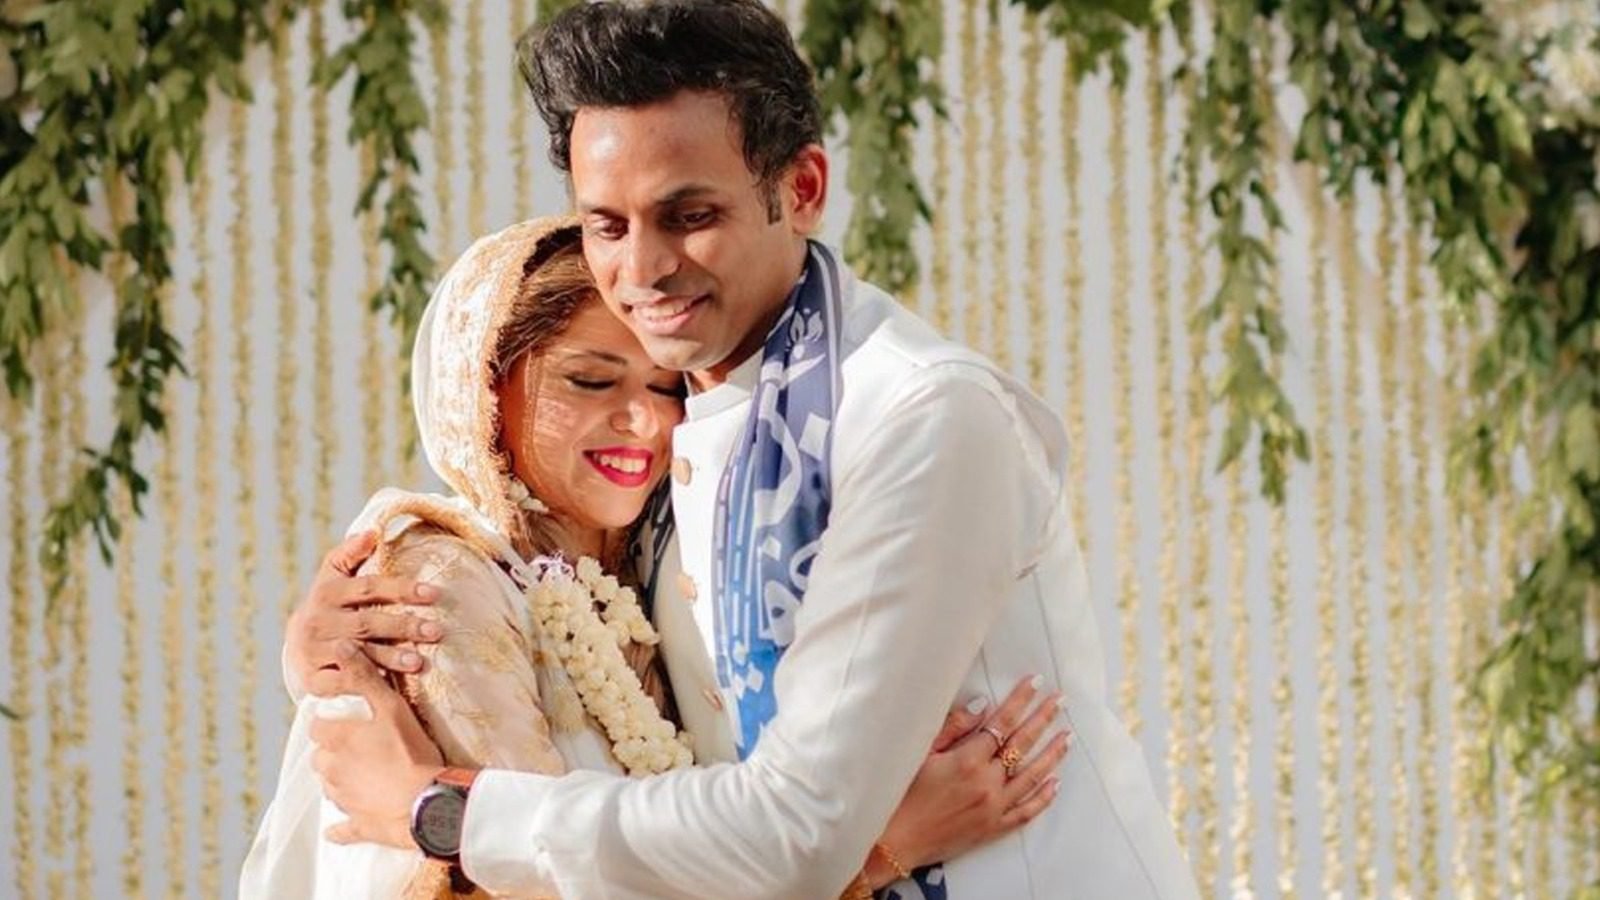 Pakistan’s famous TV anchor gets married